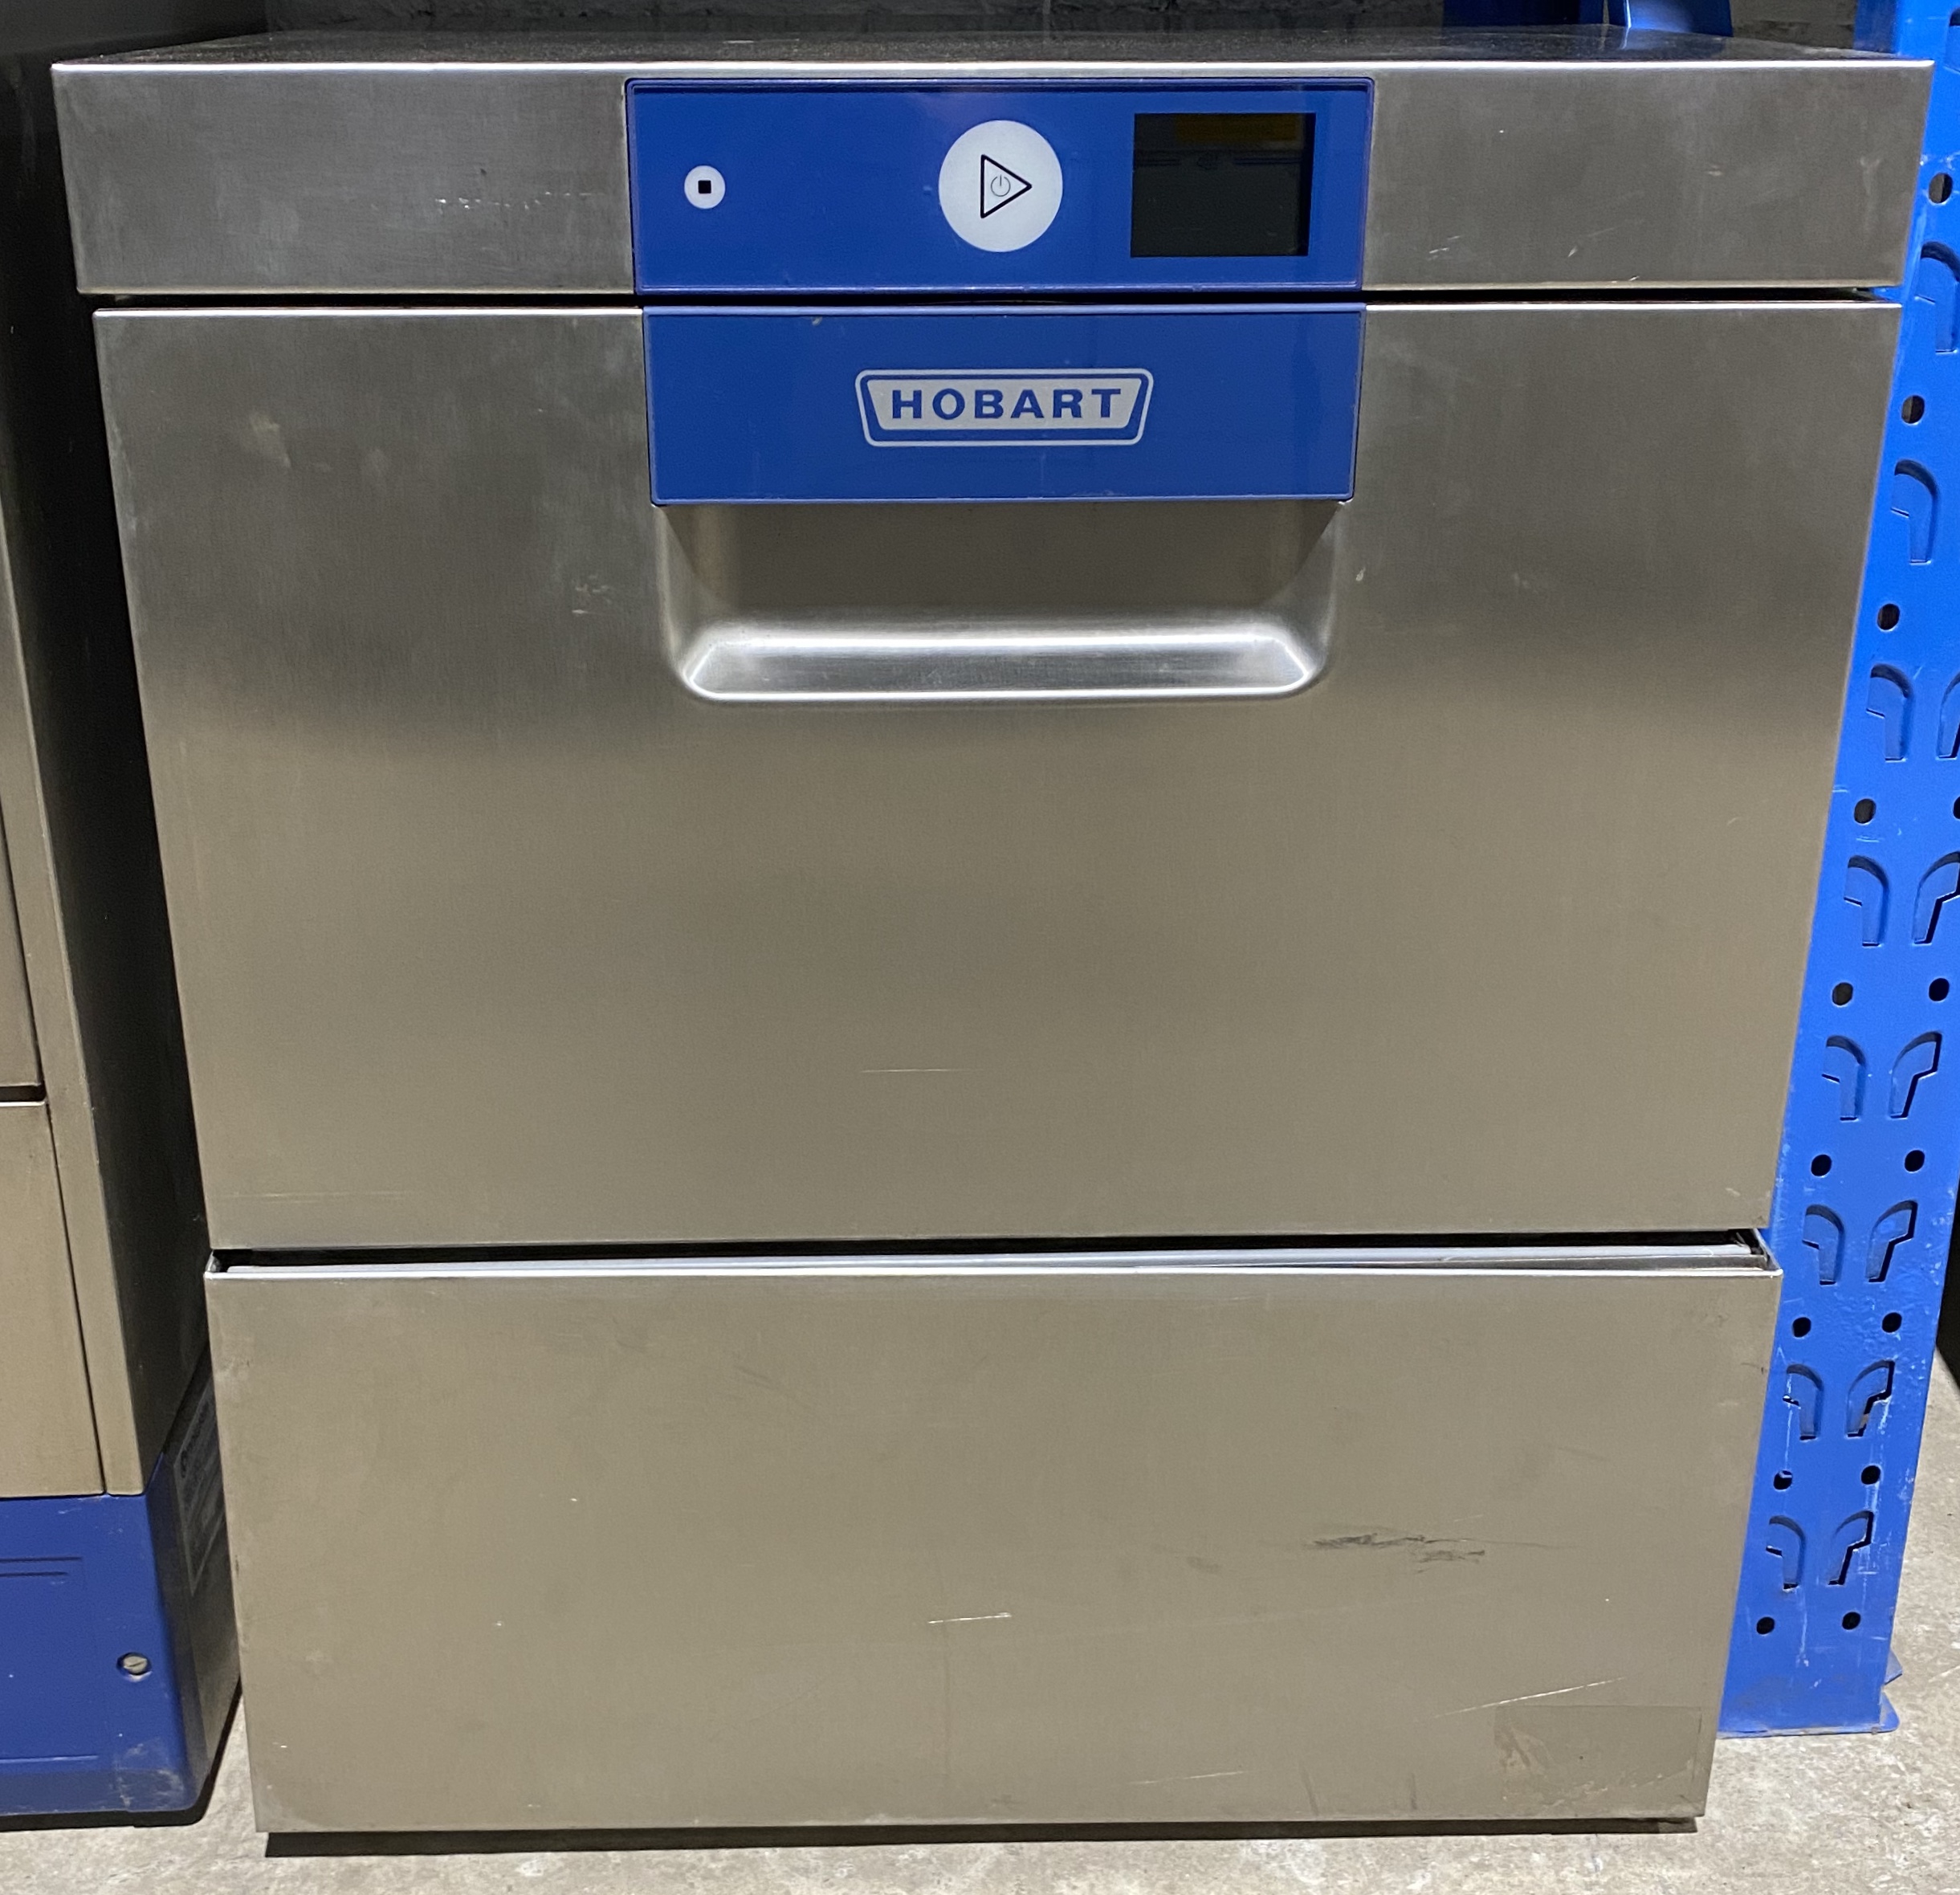 HOBART GXCS 11B Under Counter Glass Washer – 2018 mint condition